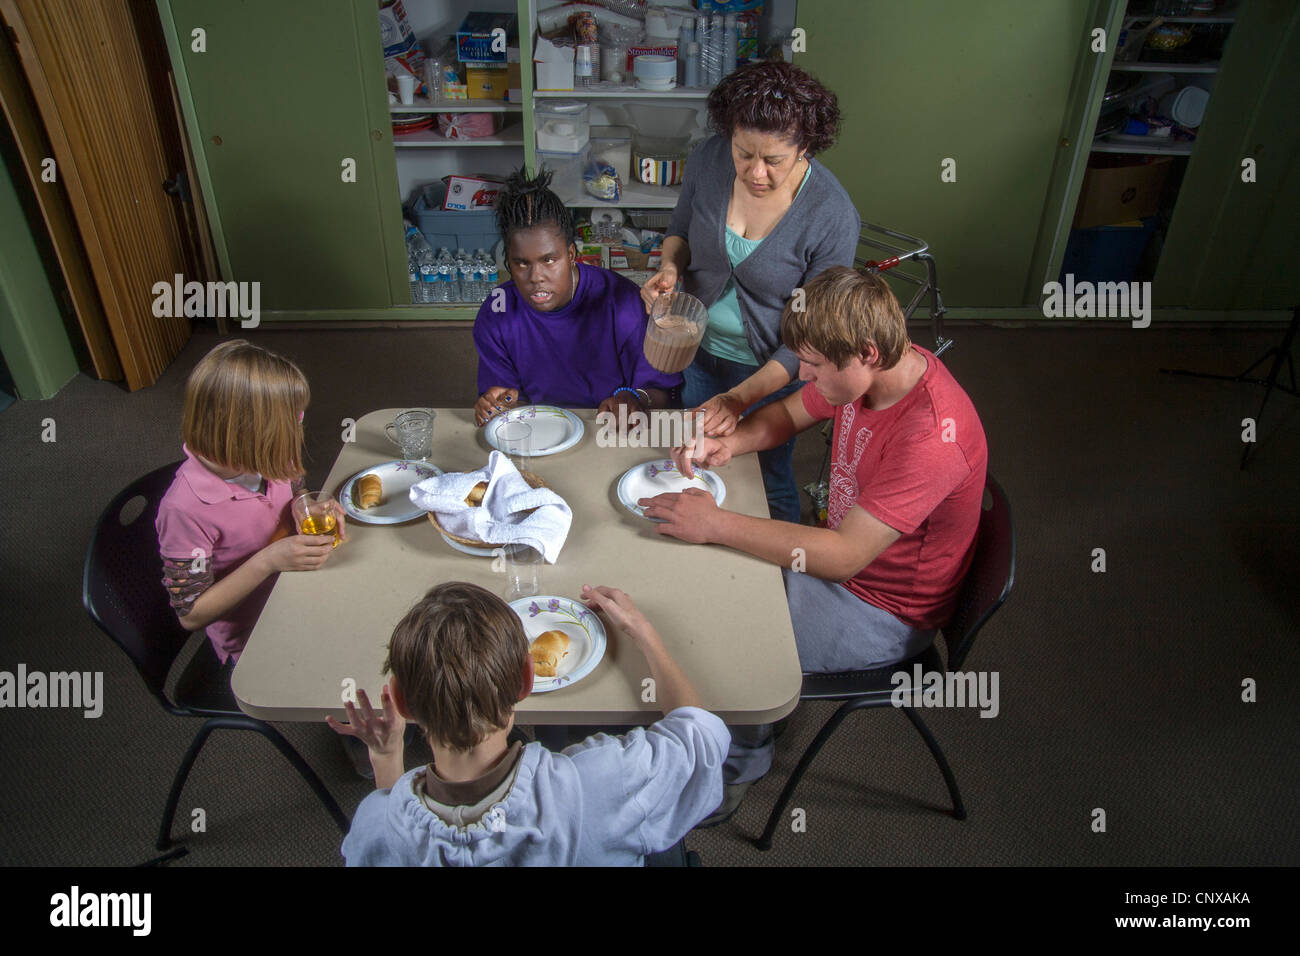 A teacher joins her blind and handicapped students sampling food they made in a cooking class at the Blind Children's Center. Stock Photo